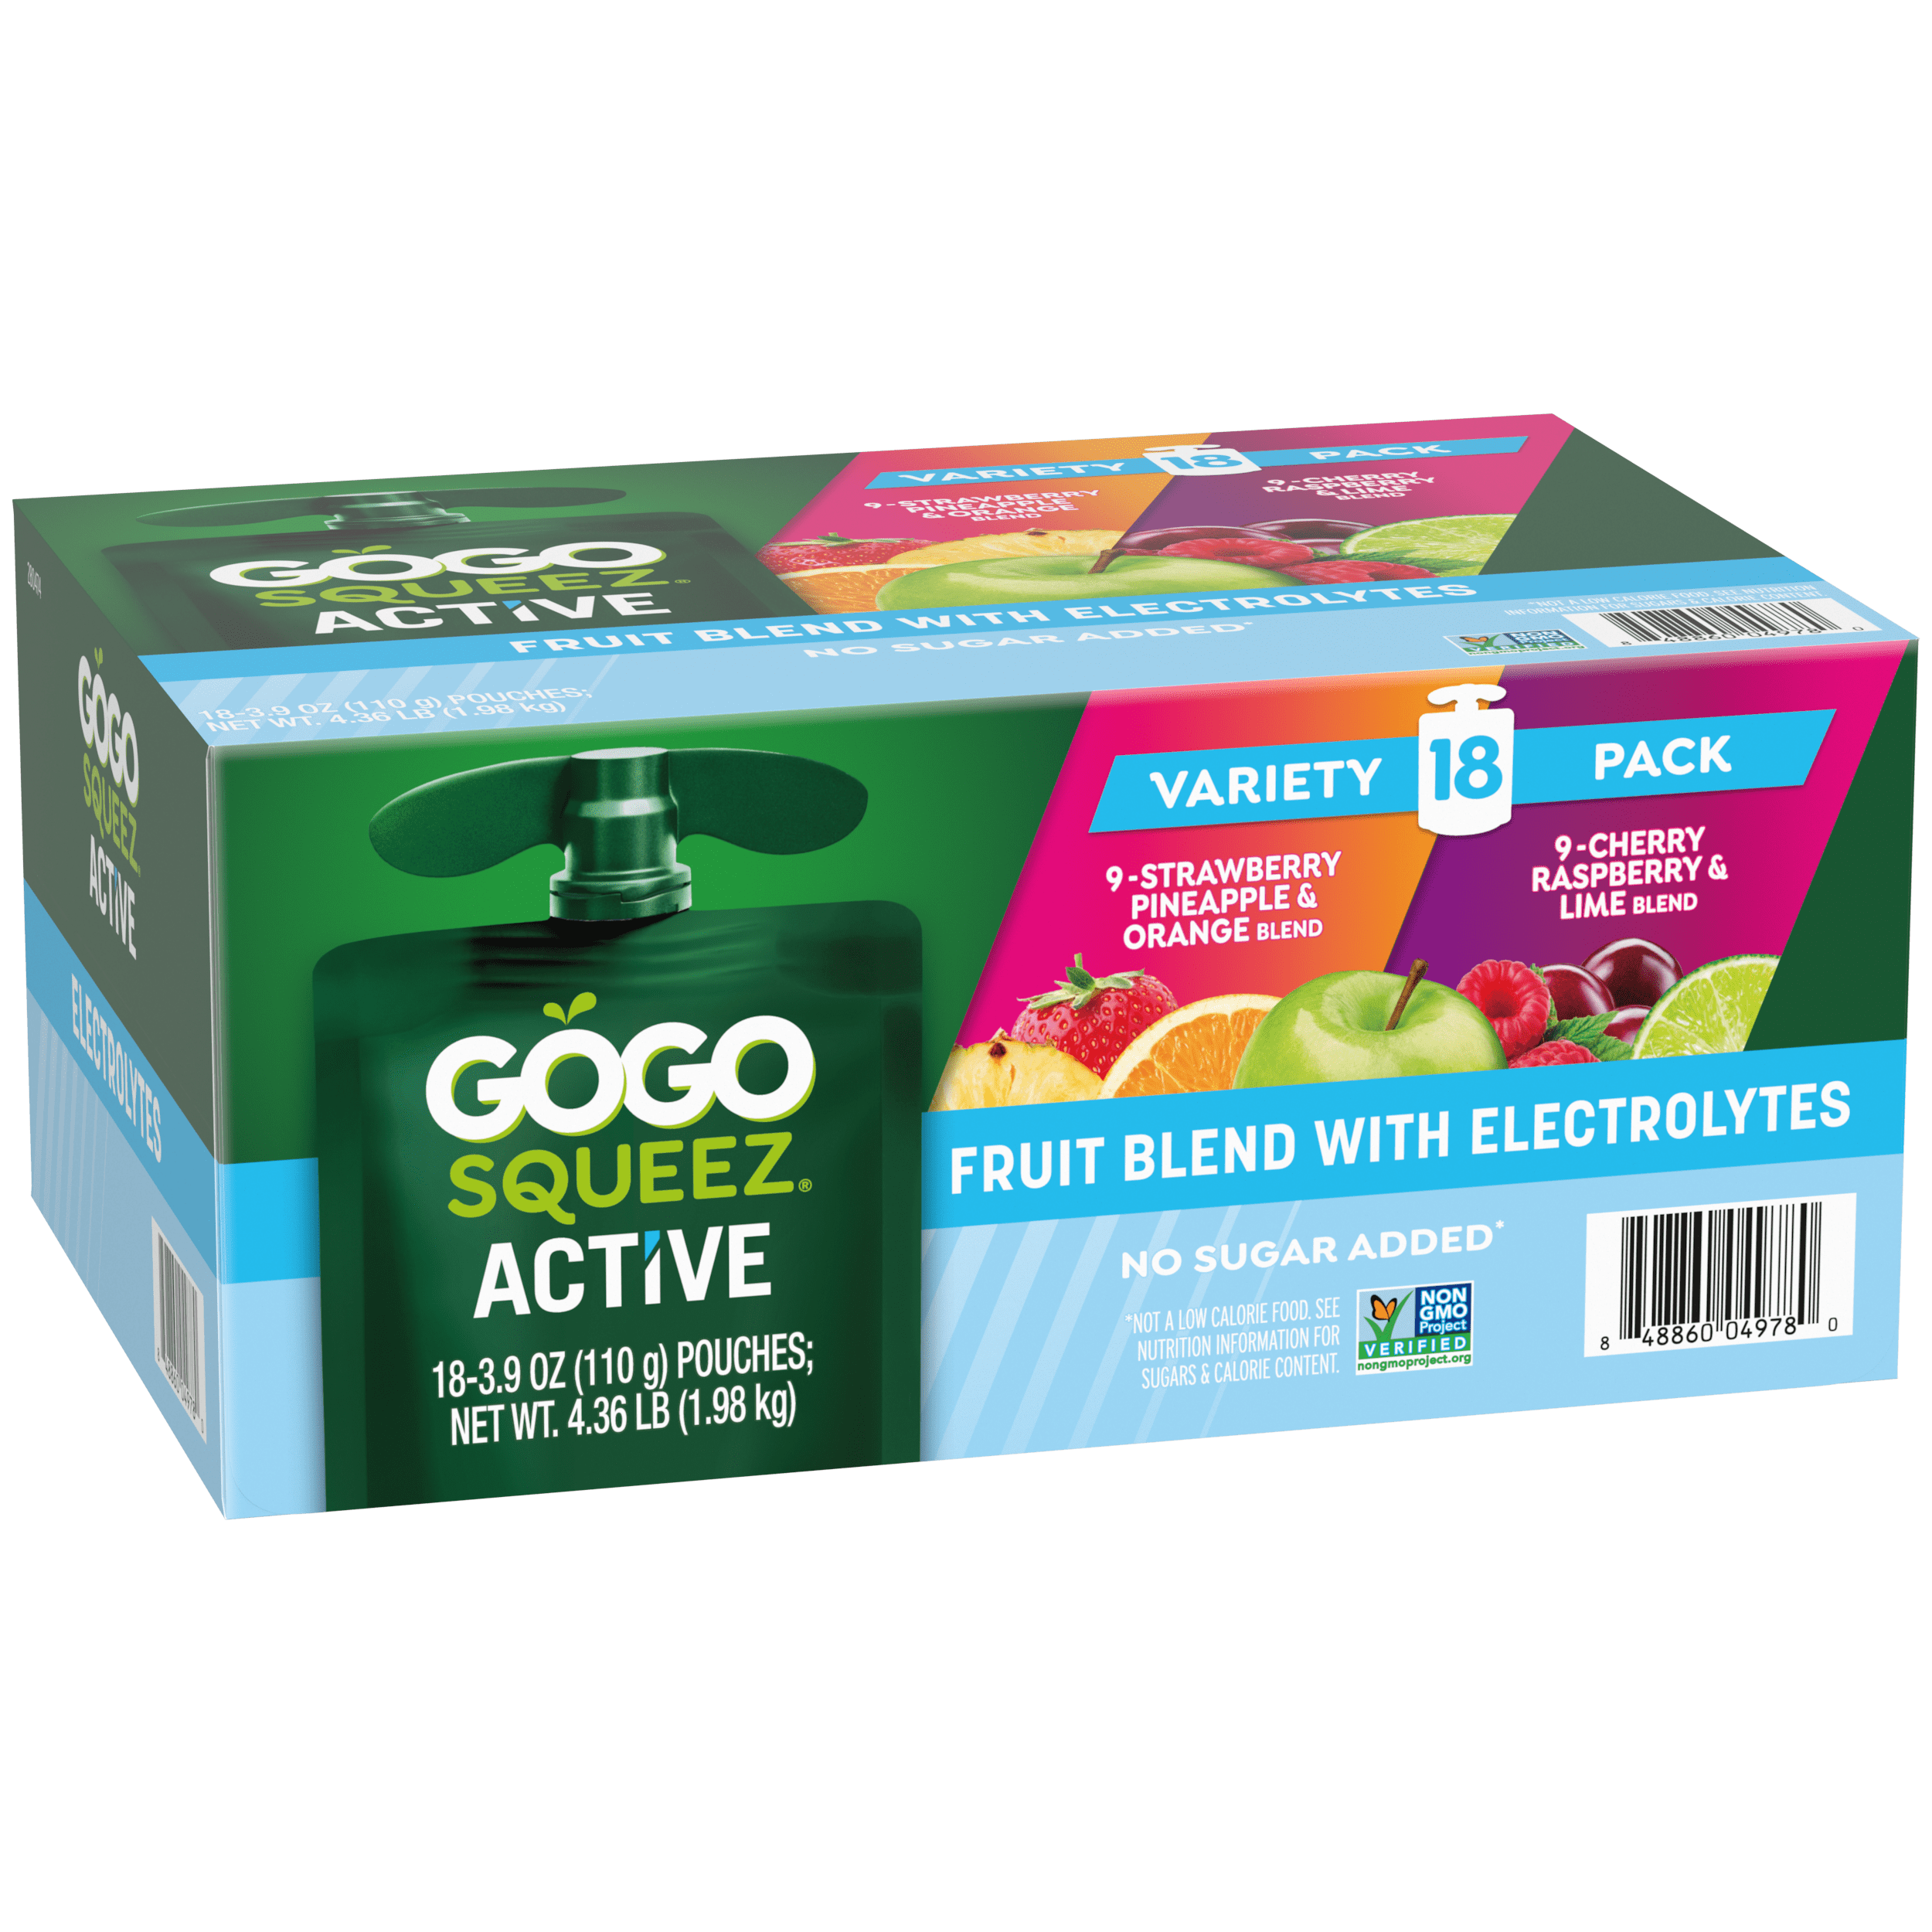 Gogo Squeez Active Fruit Blend With Electrolytes Strawberry, Pineapple & Orange; Cherry, Raspberry & Lime 18 Pack Product Box